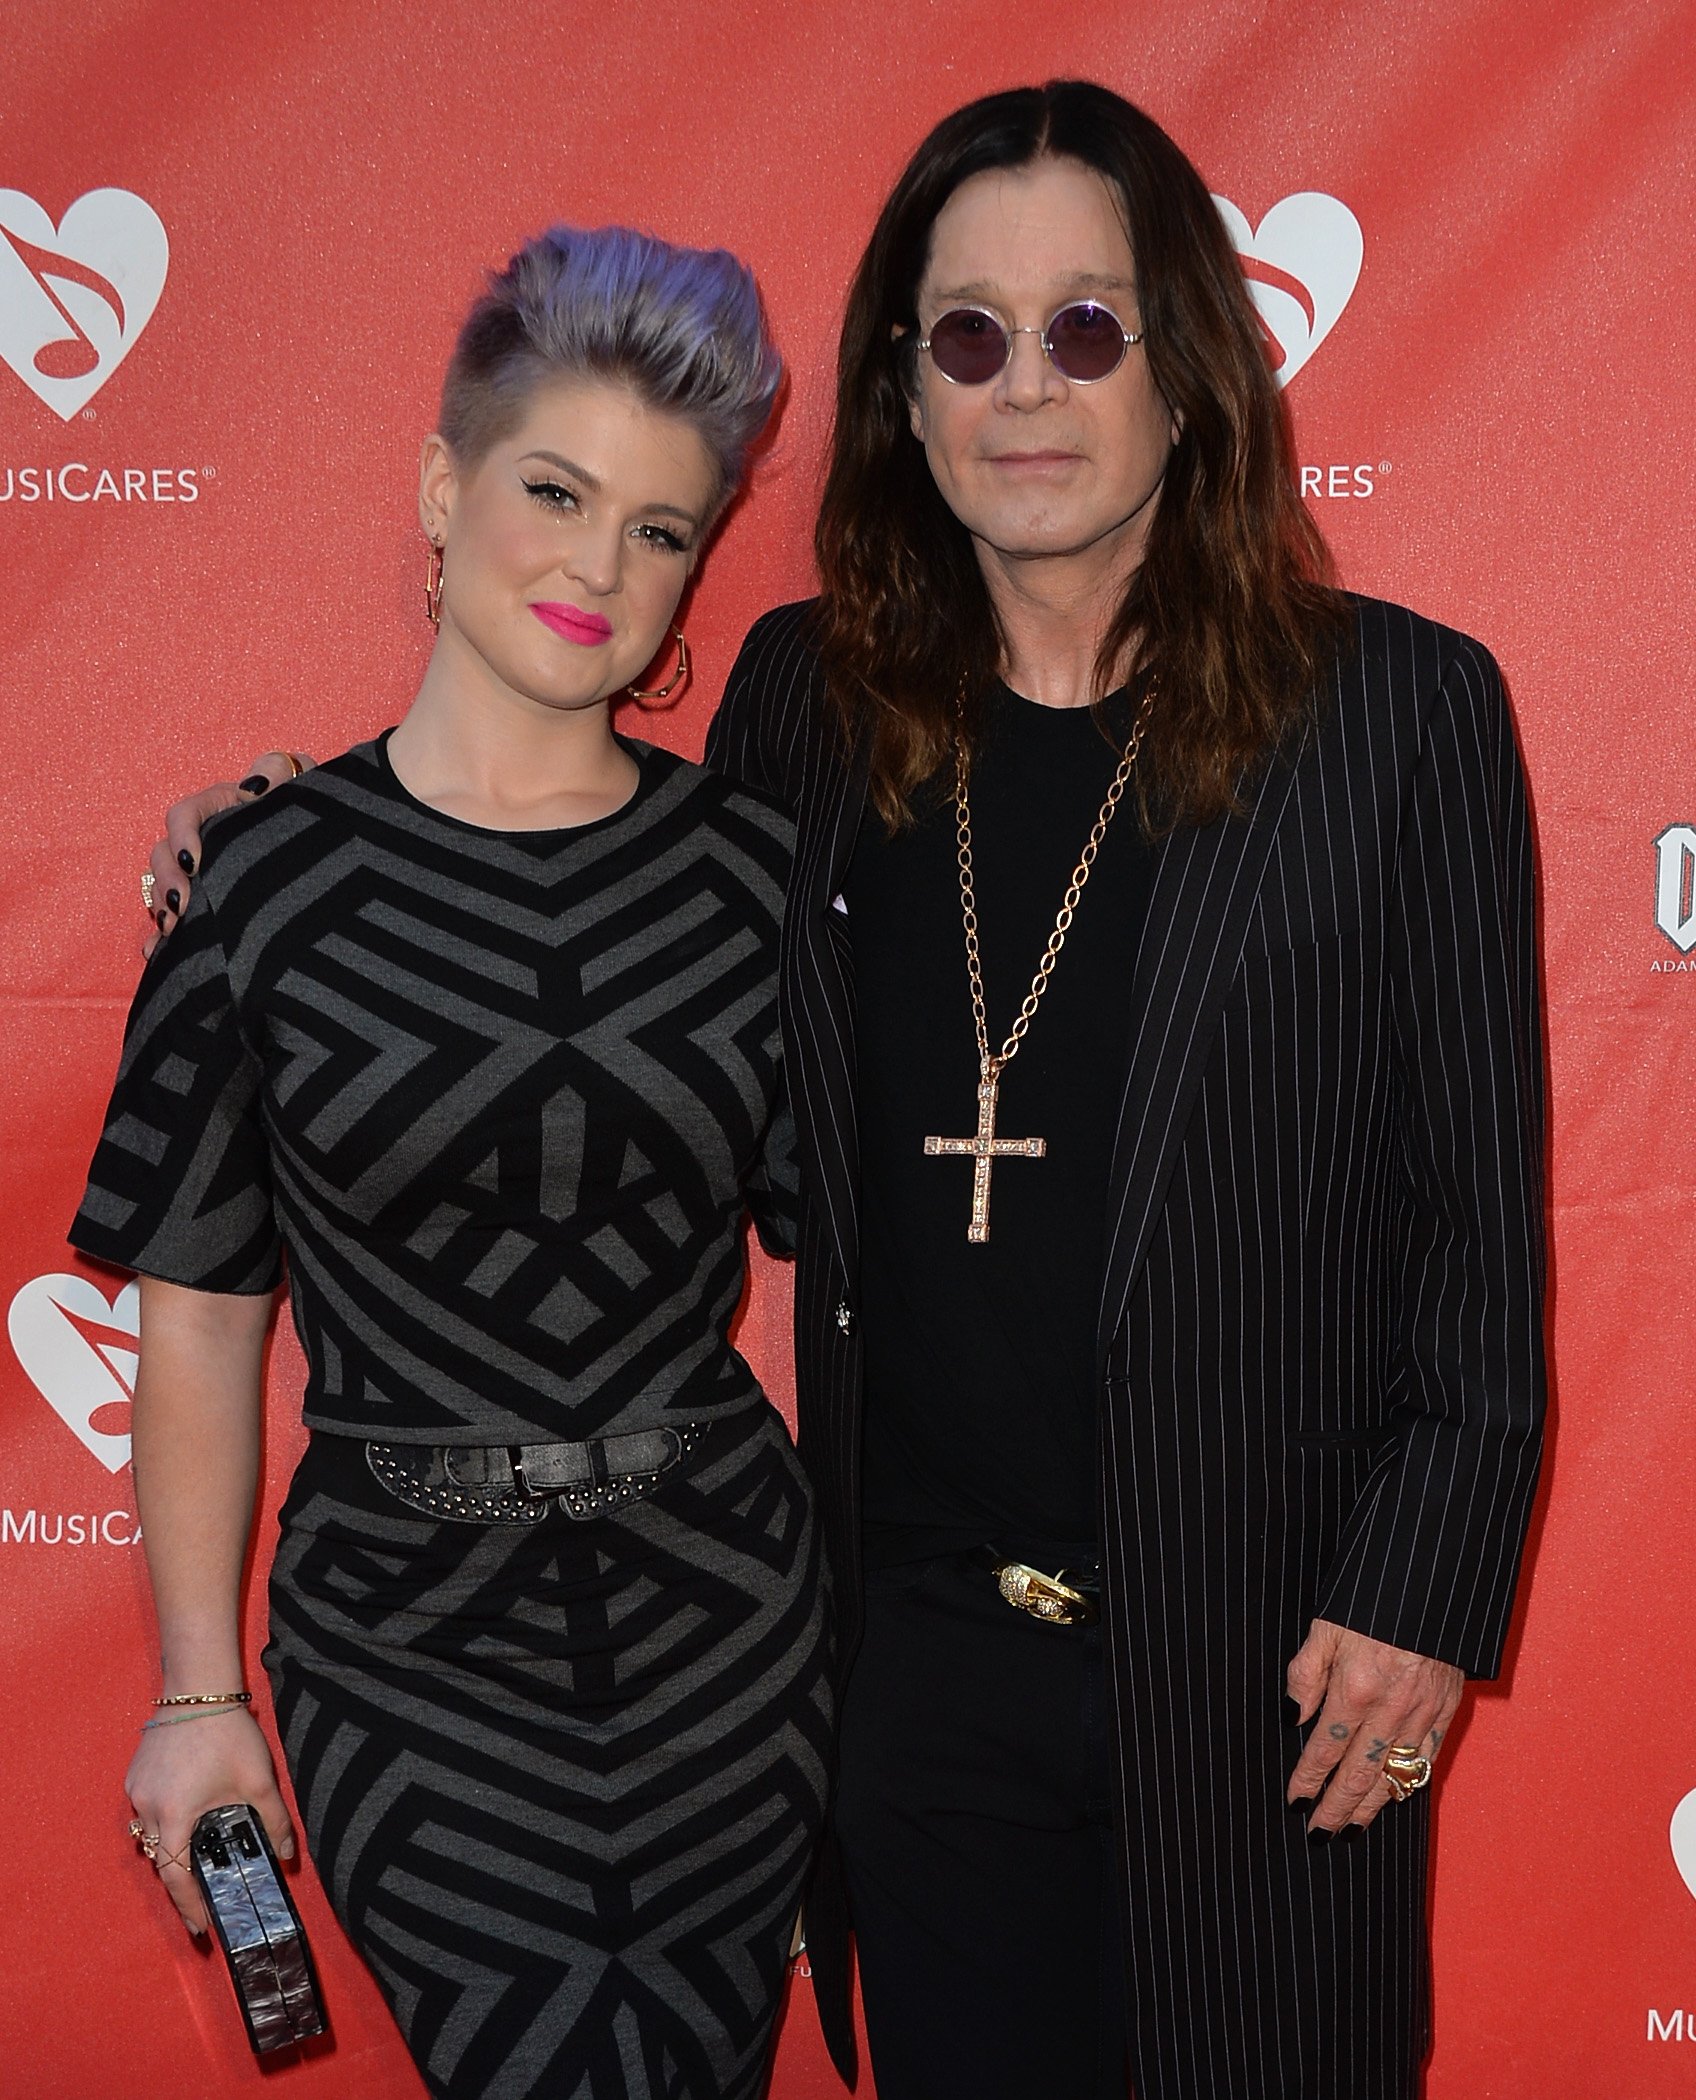 Kelly Osbourne with father Ozzy Osbourne during the 2014 Annual MusiCares MAP Fund Benefit Concert in Los Angeles California. | Photo: Getty Images